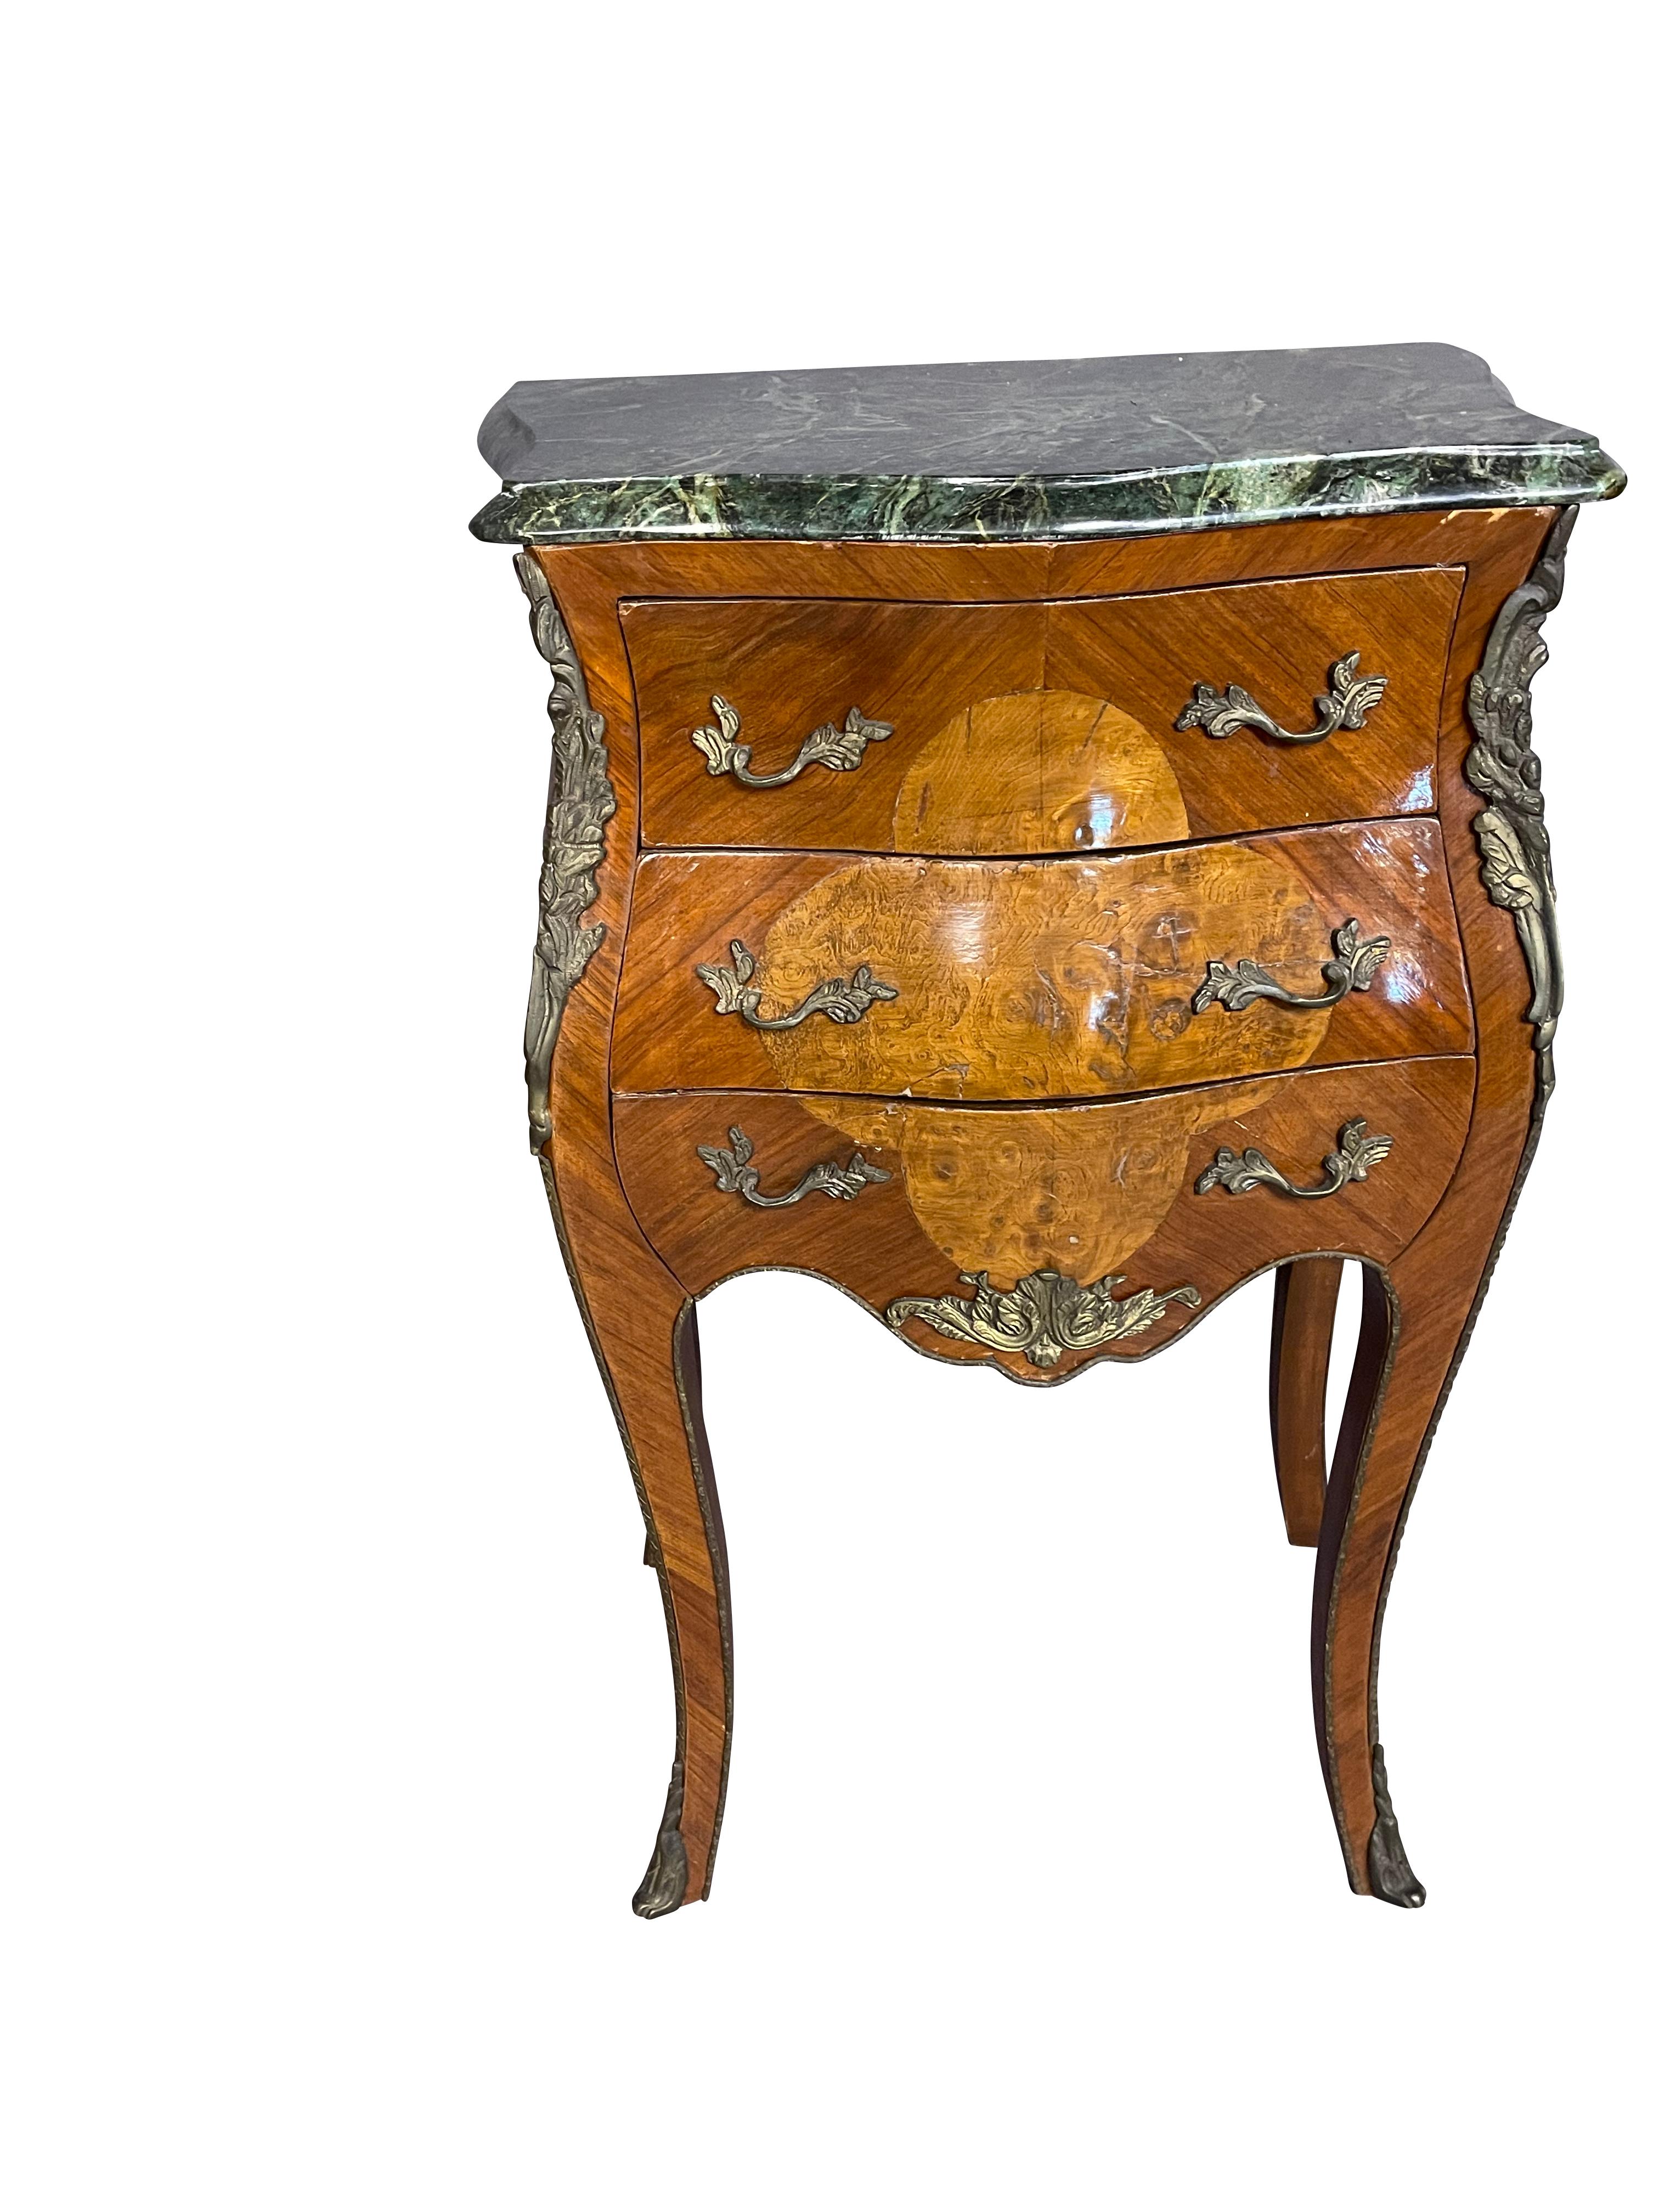 Hand-Crafted Pair of Louis XVI Style End Tables with Ormolu Trim and Green Marble Tops